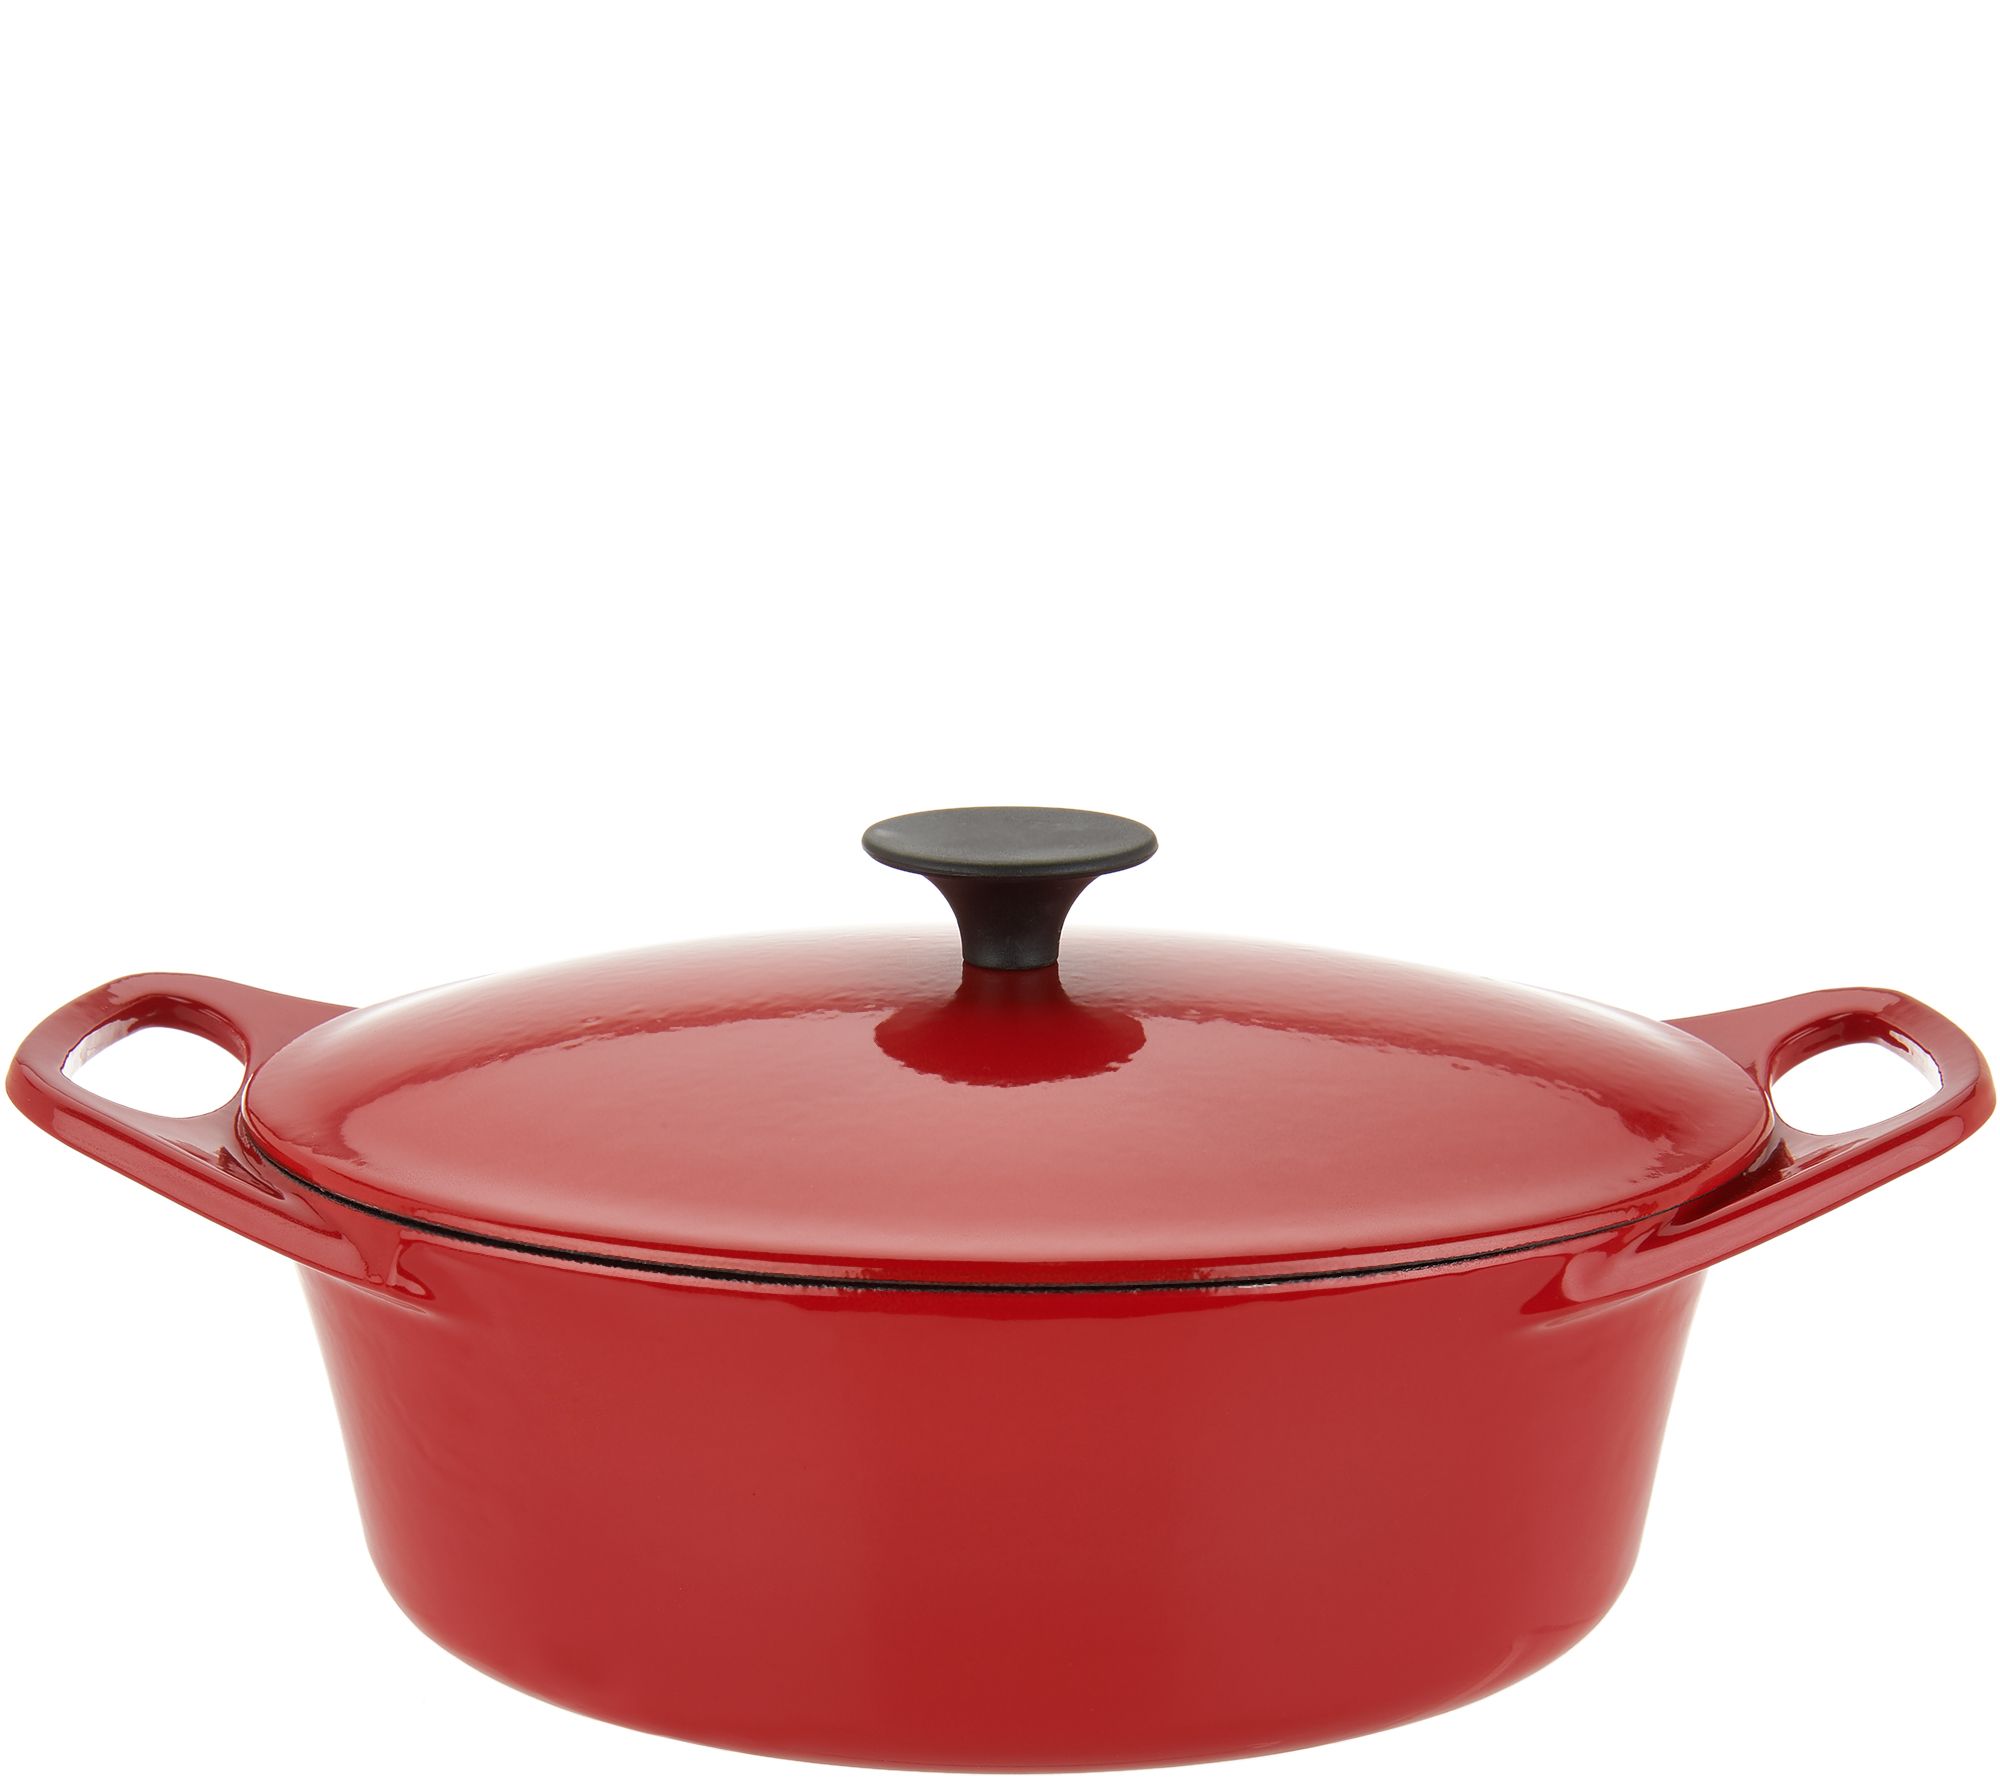 3.5 Quart Enameled Cast Iron Dutch Oven With Lid Heavy-Duty